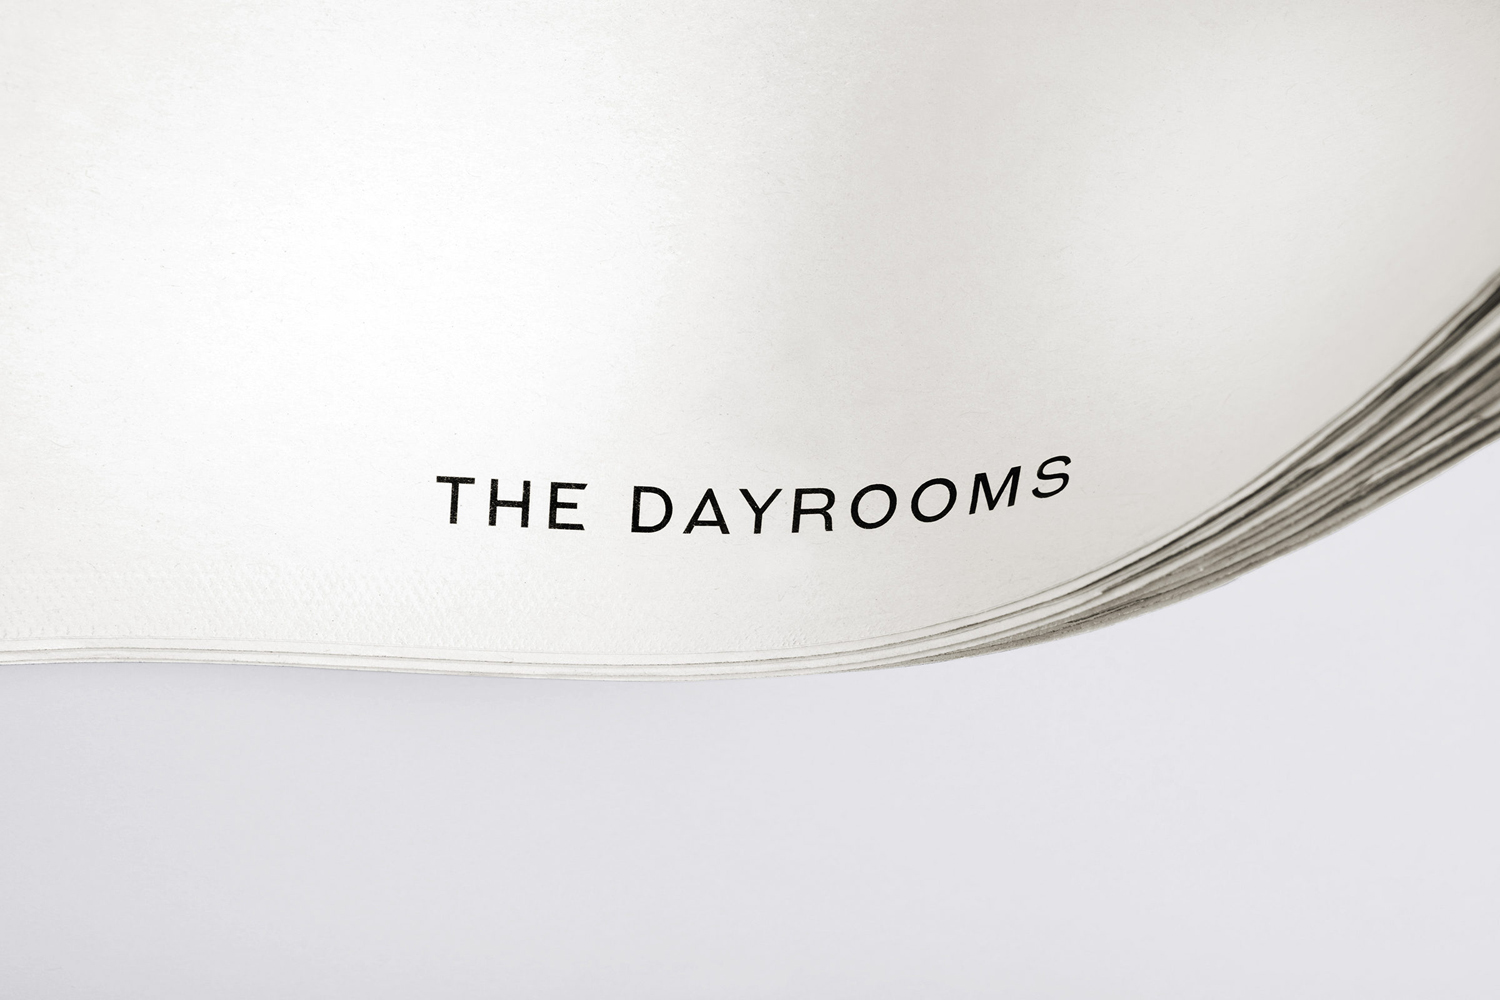 Brand identity and newsprint by Two Times Elliott for Australian fashion boutique in London The Dayrooms